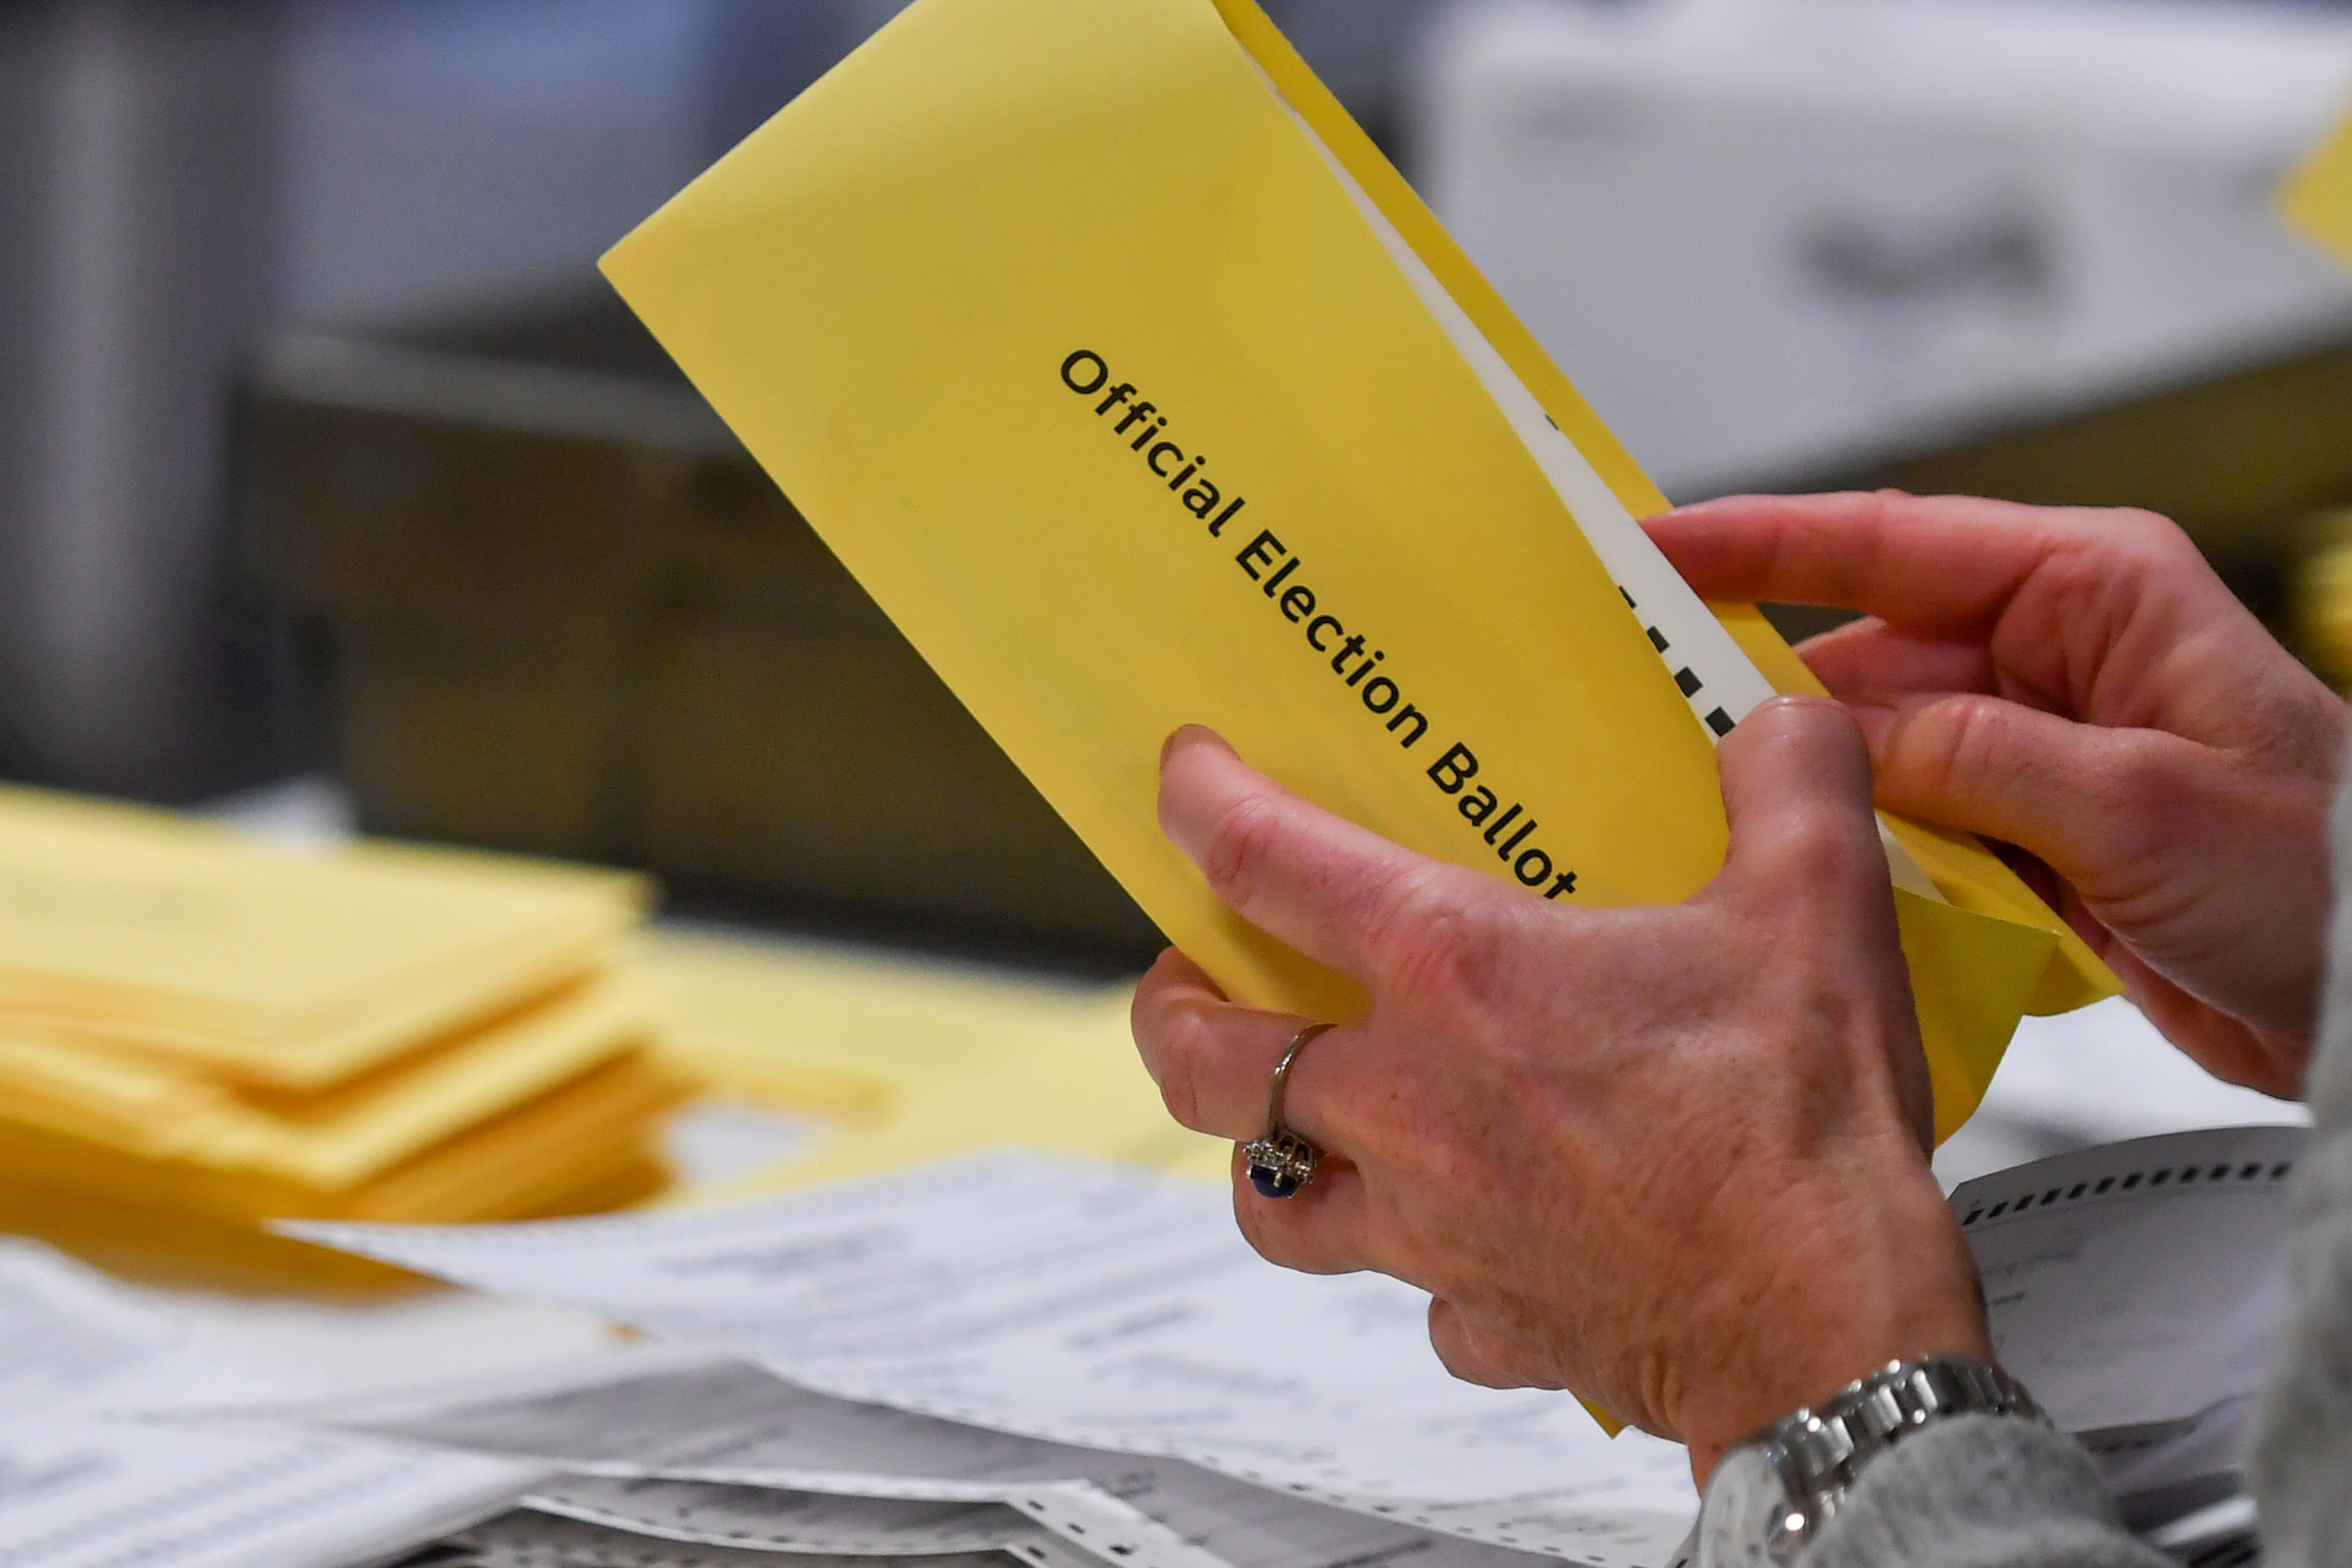 Democrats in Pa. House advance election bill that would allow counties to process mail-in ballots faster